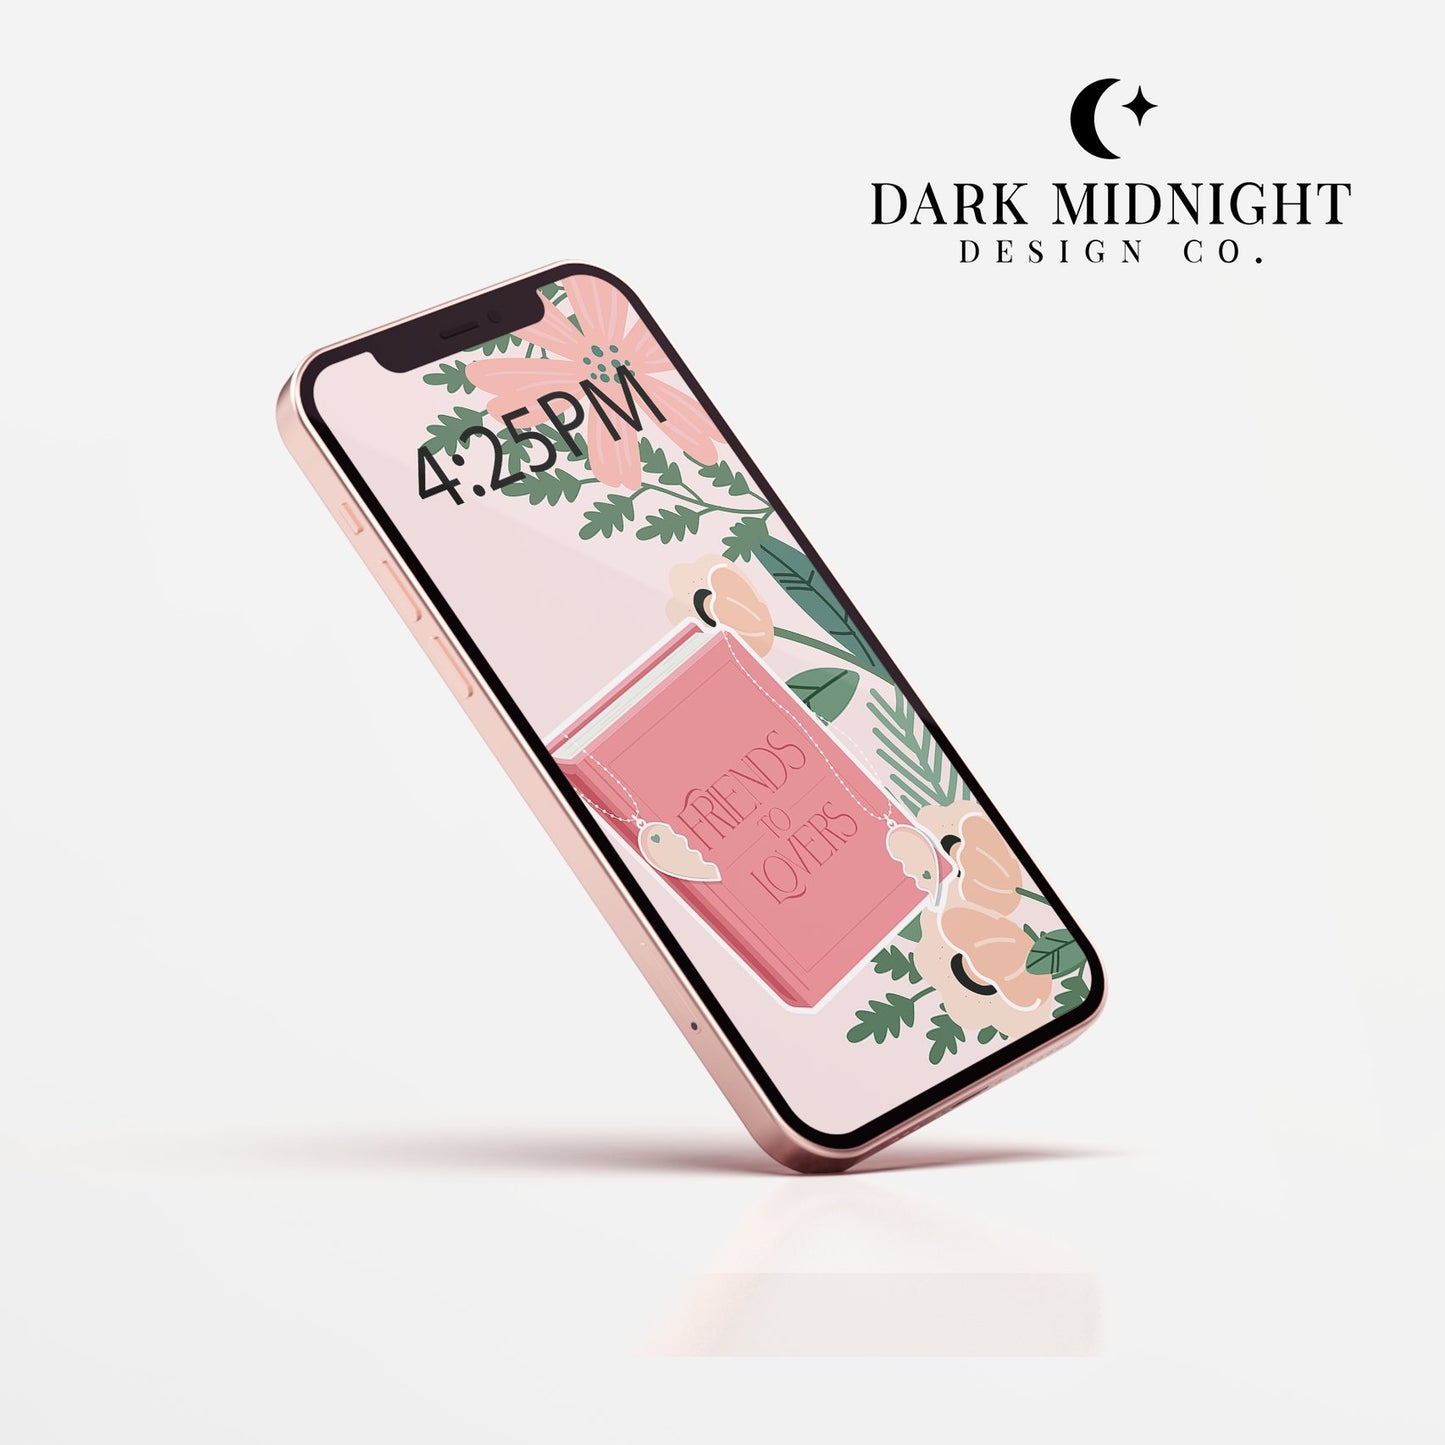 Friends to Lovers Pink Bookish Tropes and Florals Phone Wallpaper - Dark Midnight Design Co